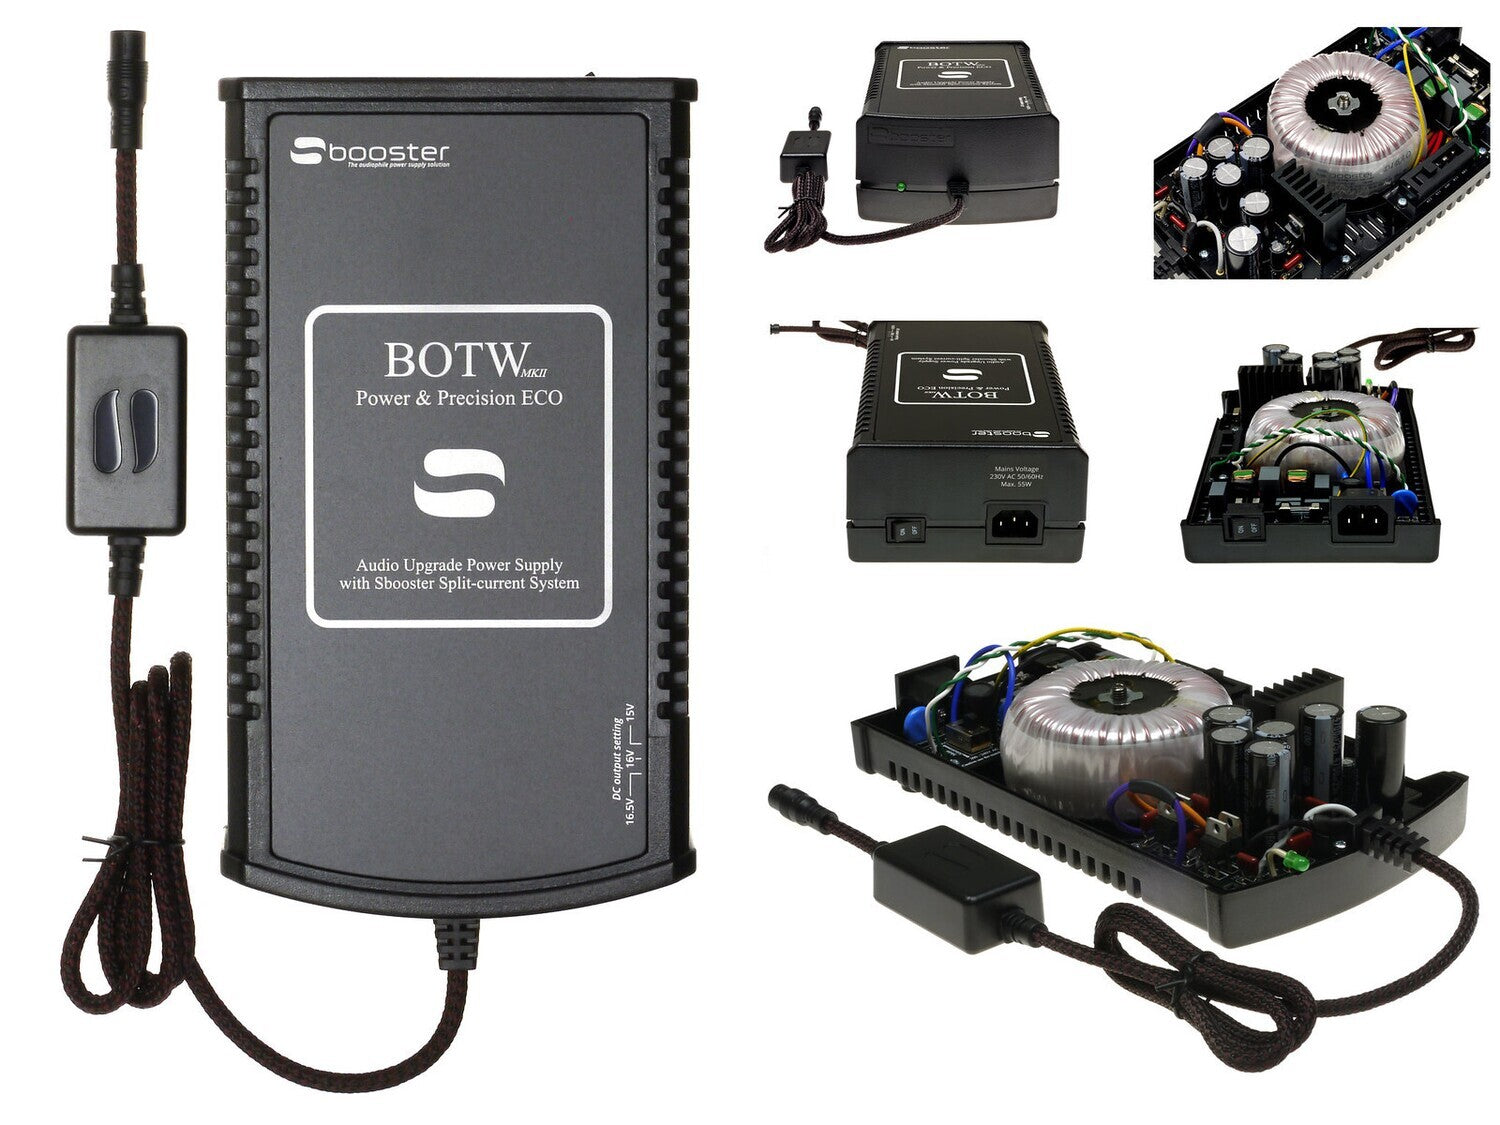 Sbooster BOTW P&P ECO MKII - Audio Excellence - {{{{ product.product_type }} - Sbooster